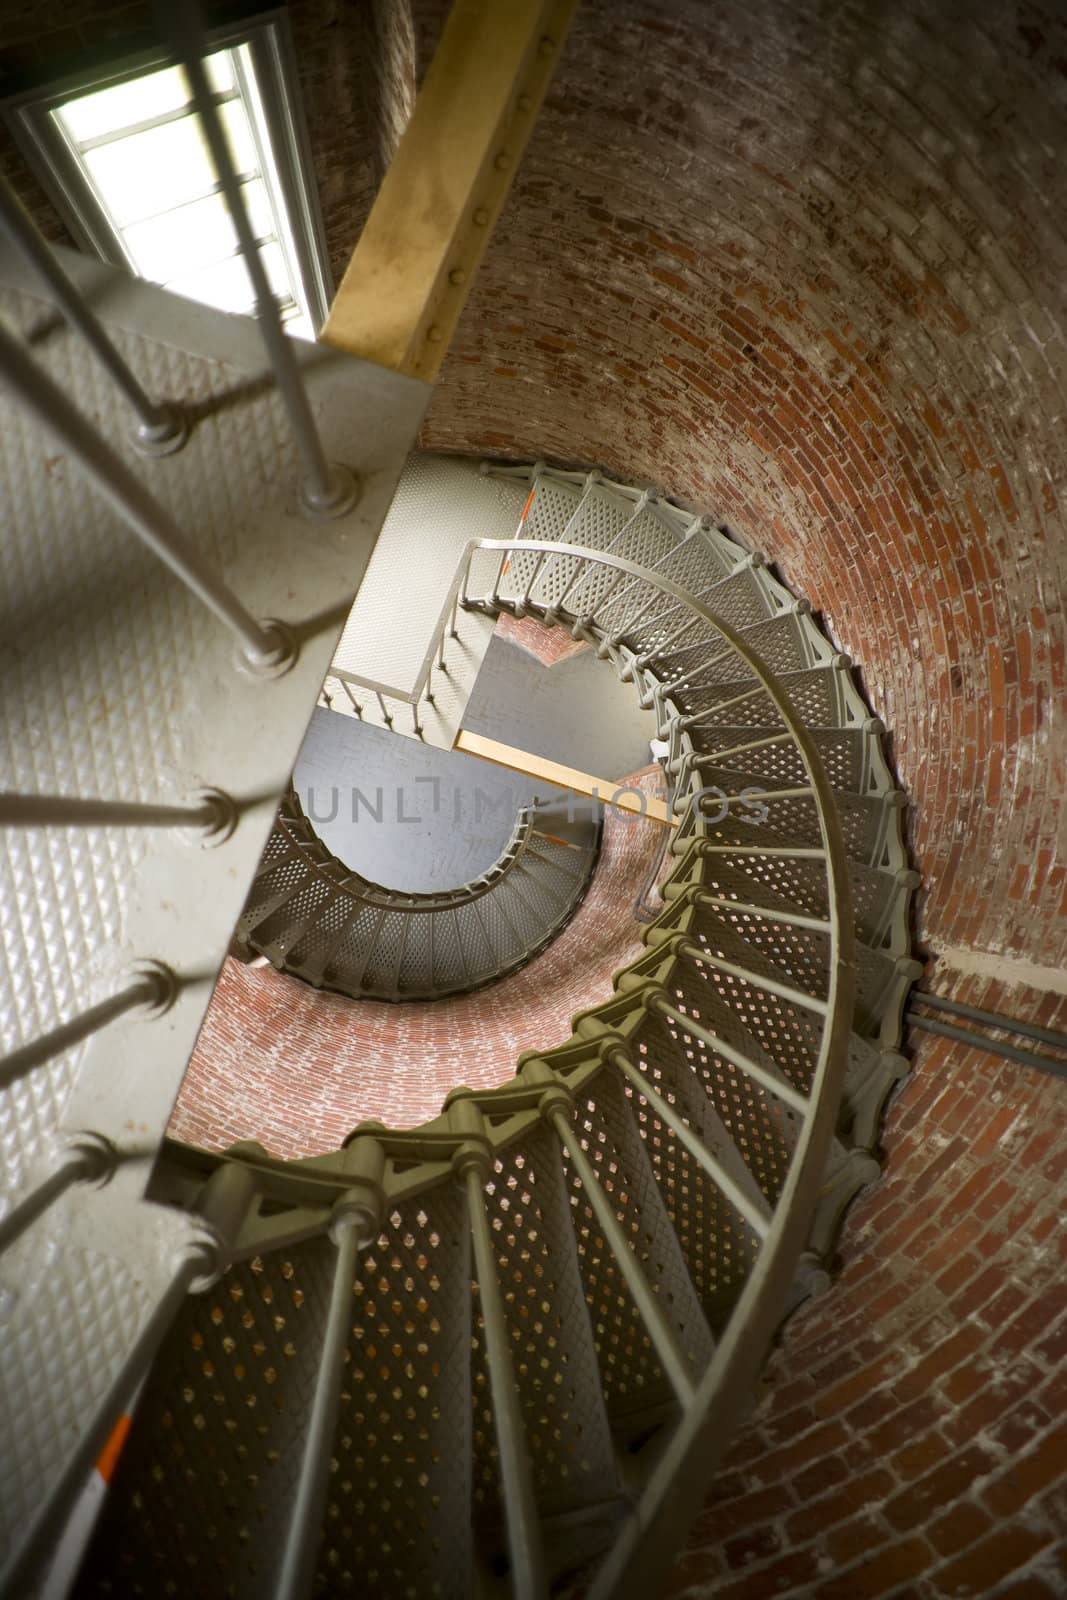 A spiral staircase inside a west coast lighthouse